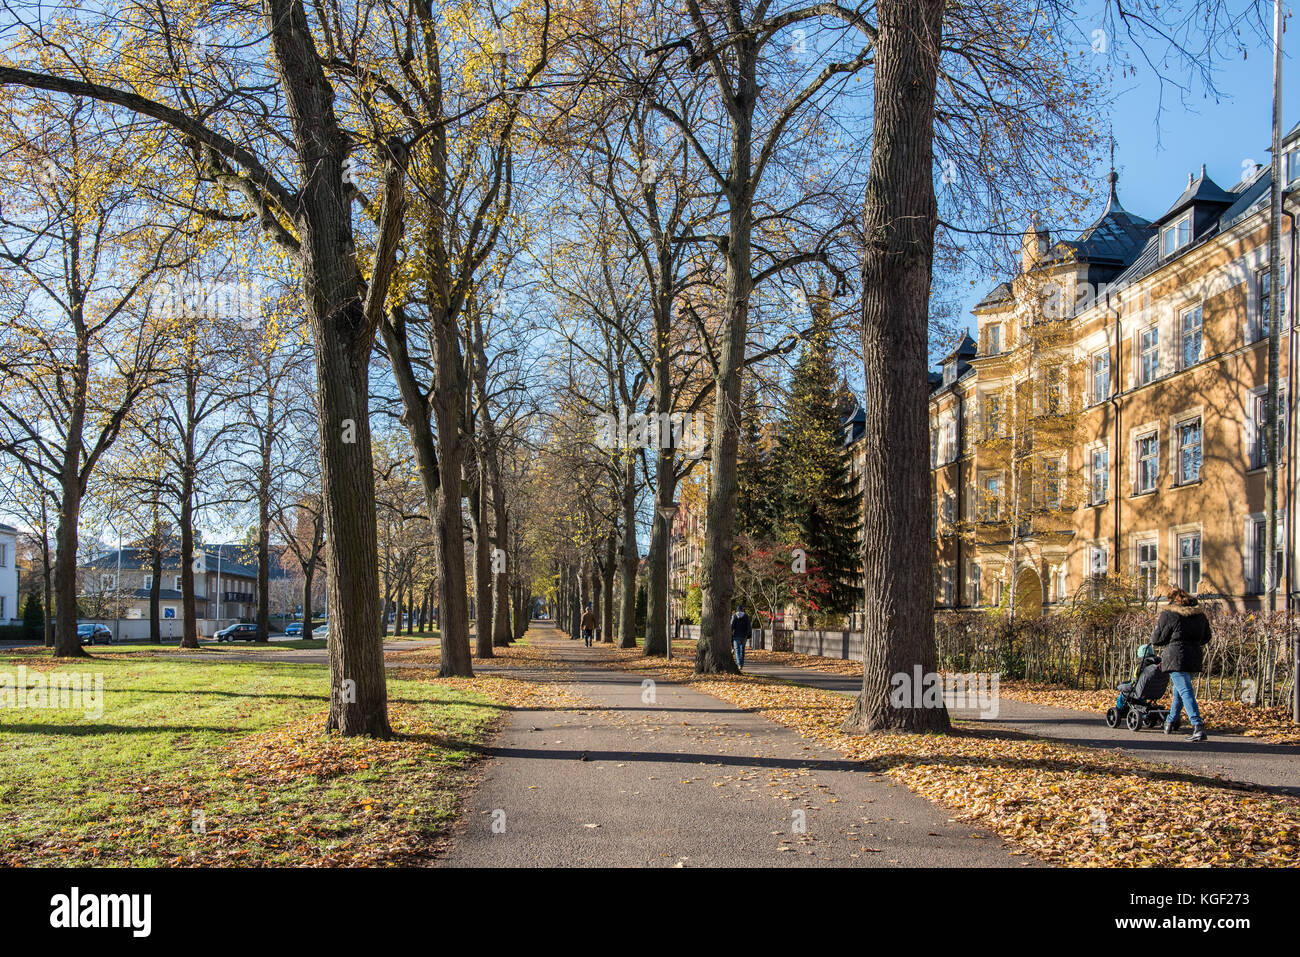 The Southern Promenade  in Norrkoping. Norrkoping is a historic industrial town and the Boulevards in Paris inspired the design of the Promenades Stock Photo